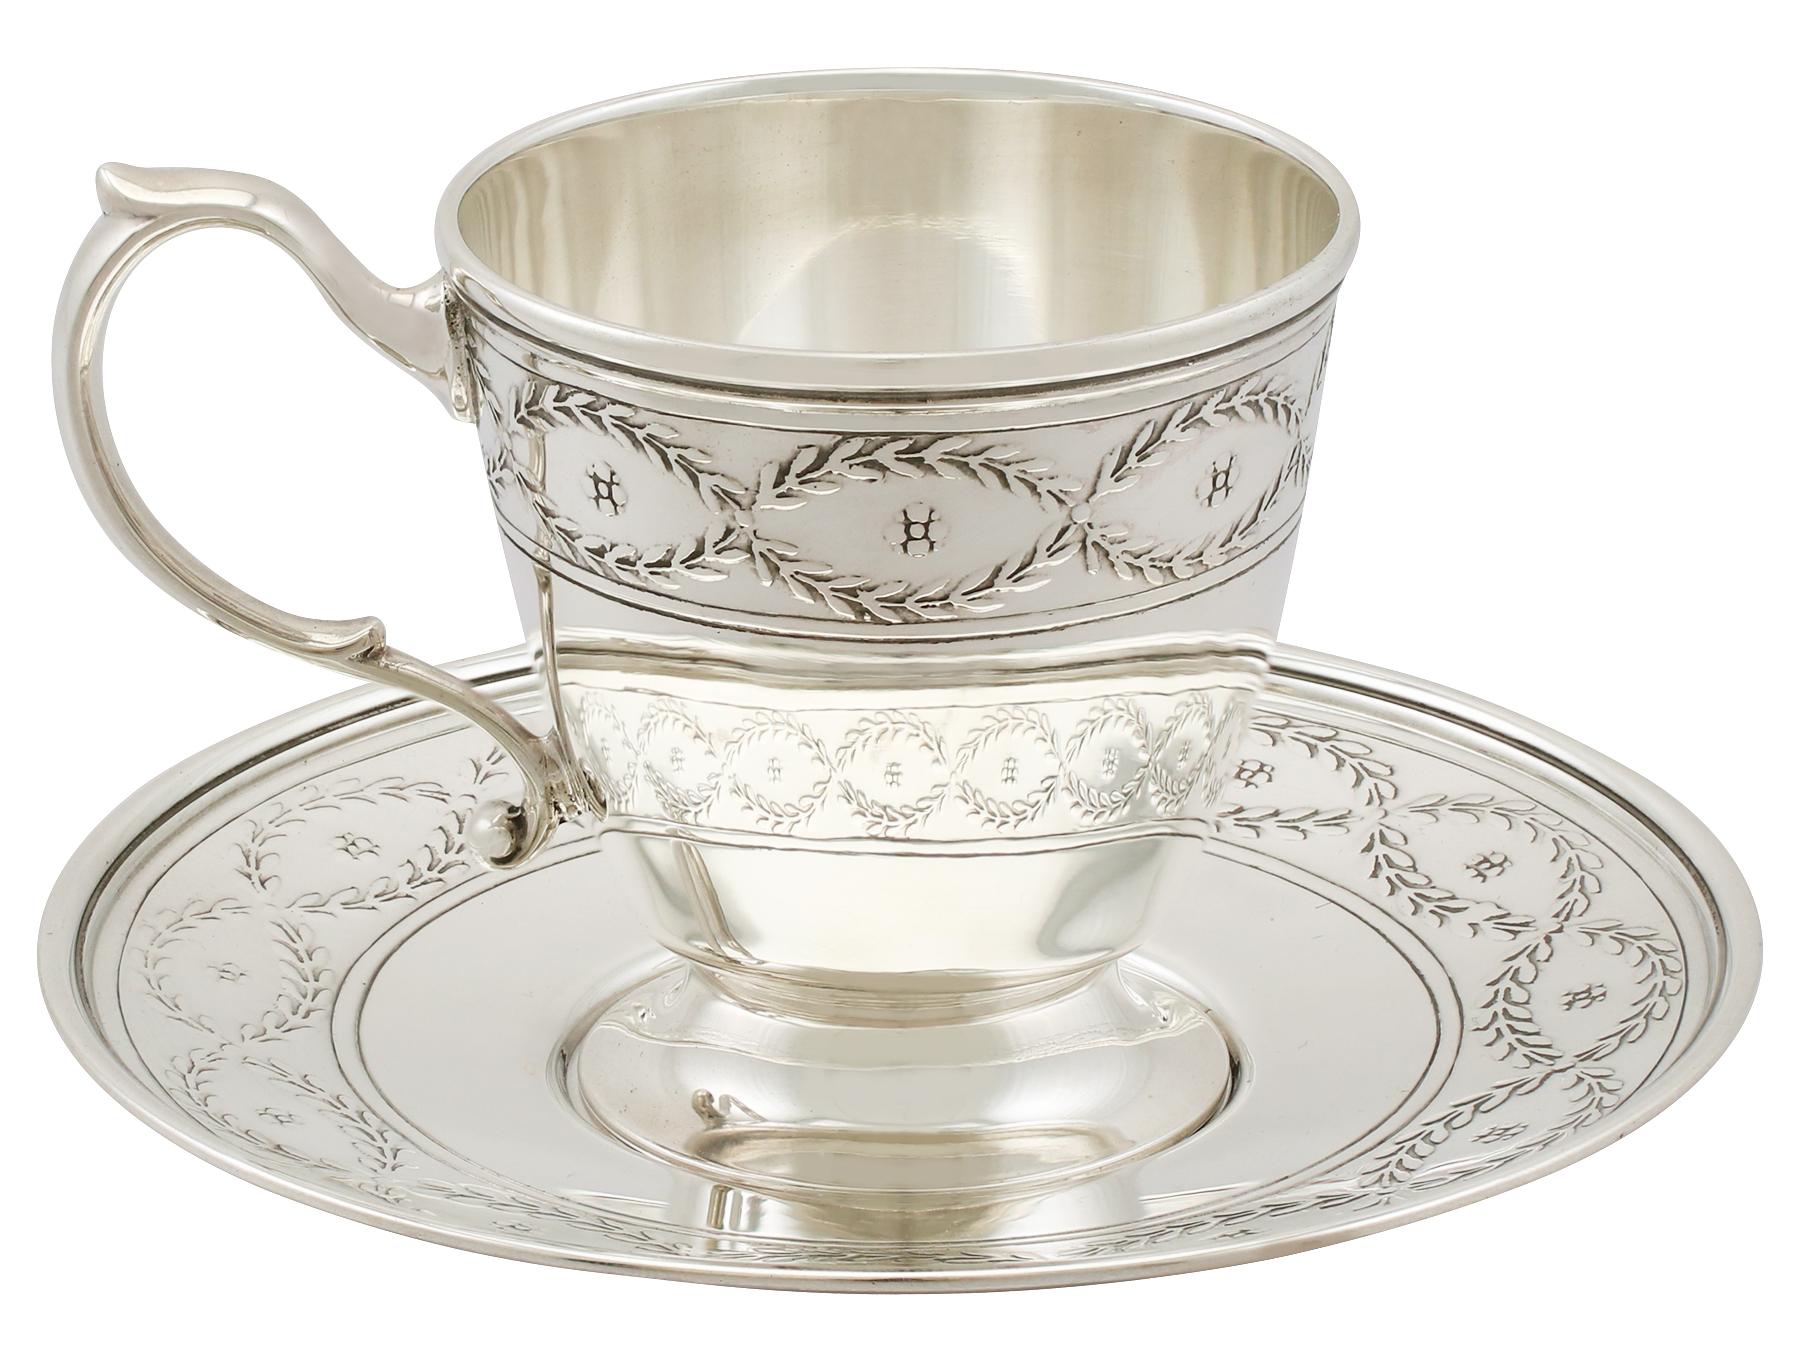 An exceptional, fine and impressive antique American sterling silver cups and saucers set, made by Tiffany & Co.; an addition to our silver teaware collection.

This exceptional antique American sterling silver teaware set consists of eight tea